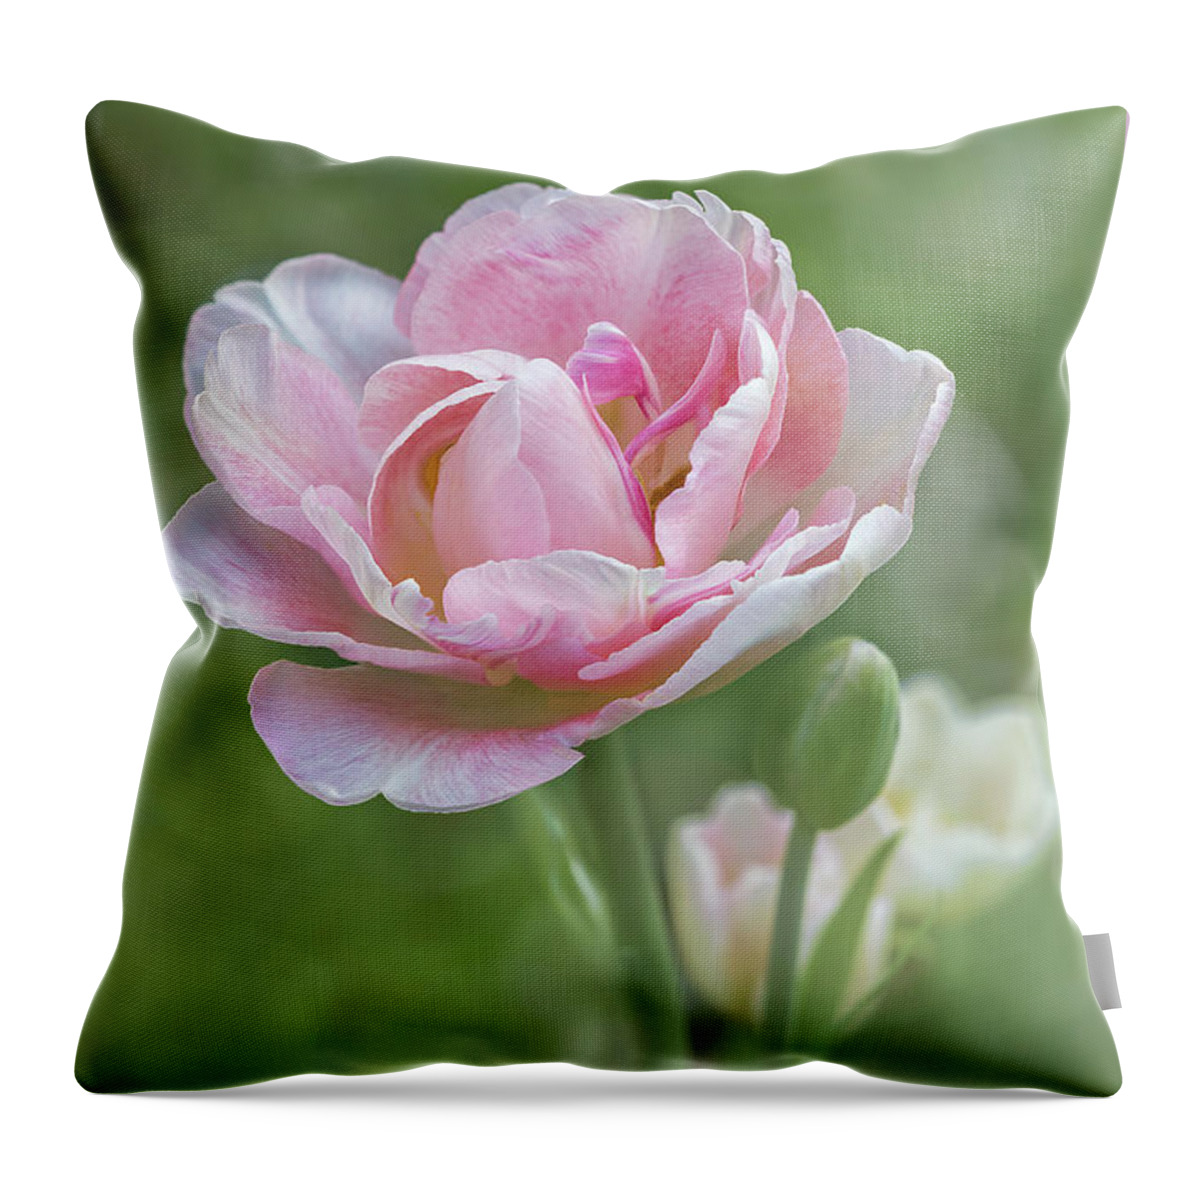 Flower Throw Pillow featuring the photograph Peony Tulip - Vertical Texture by Patti Deters